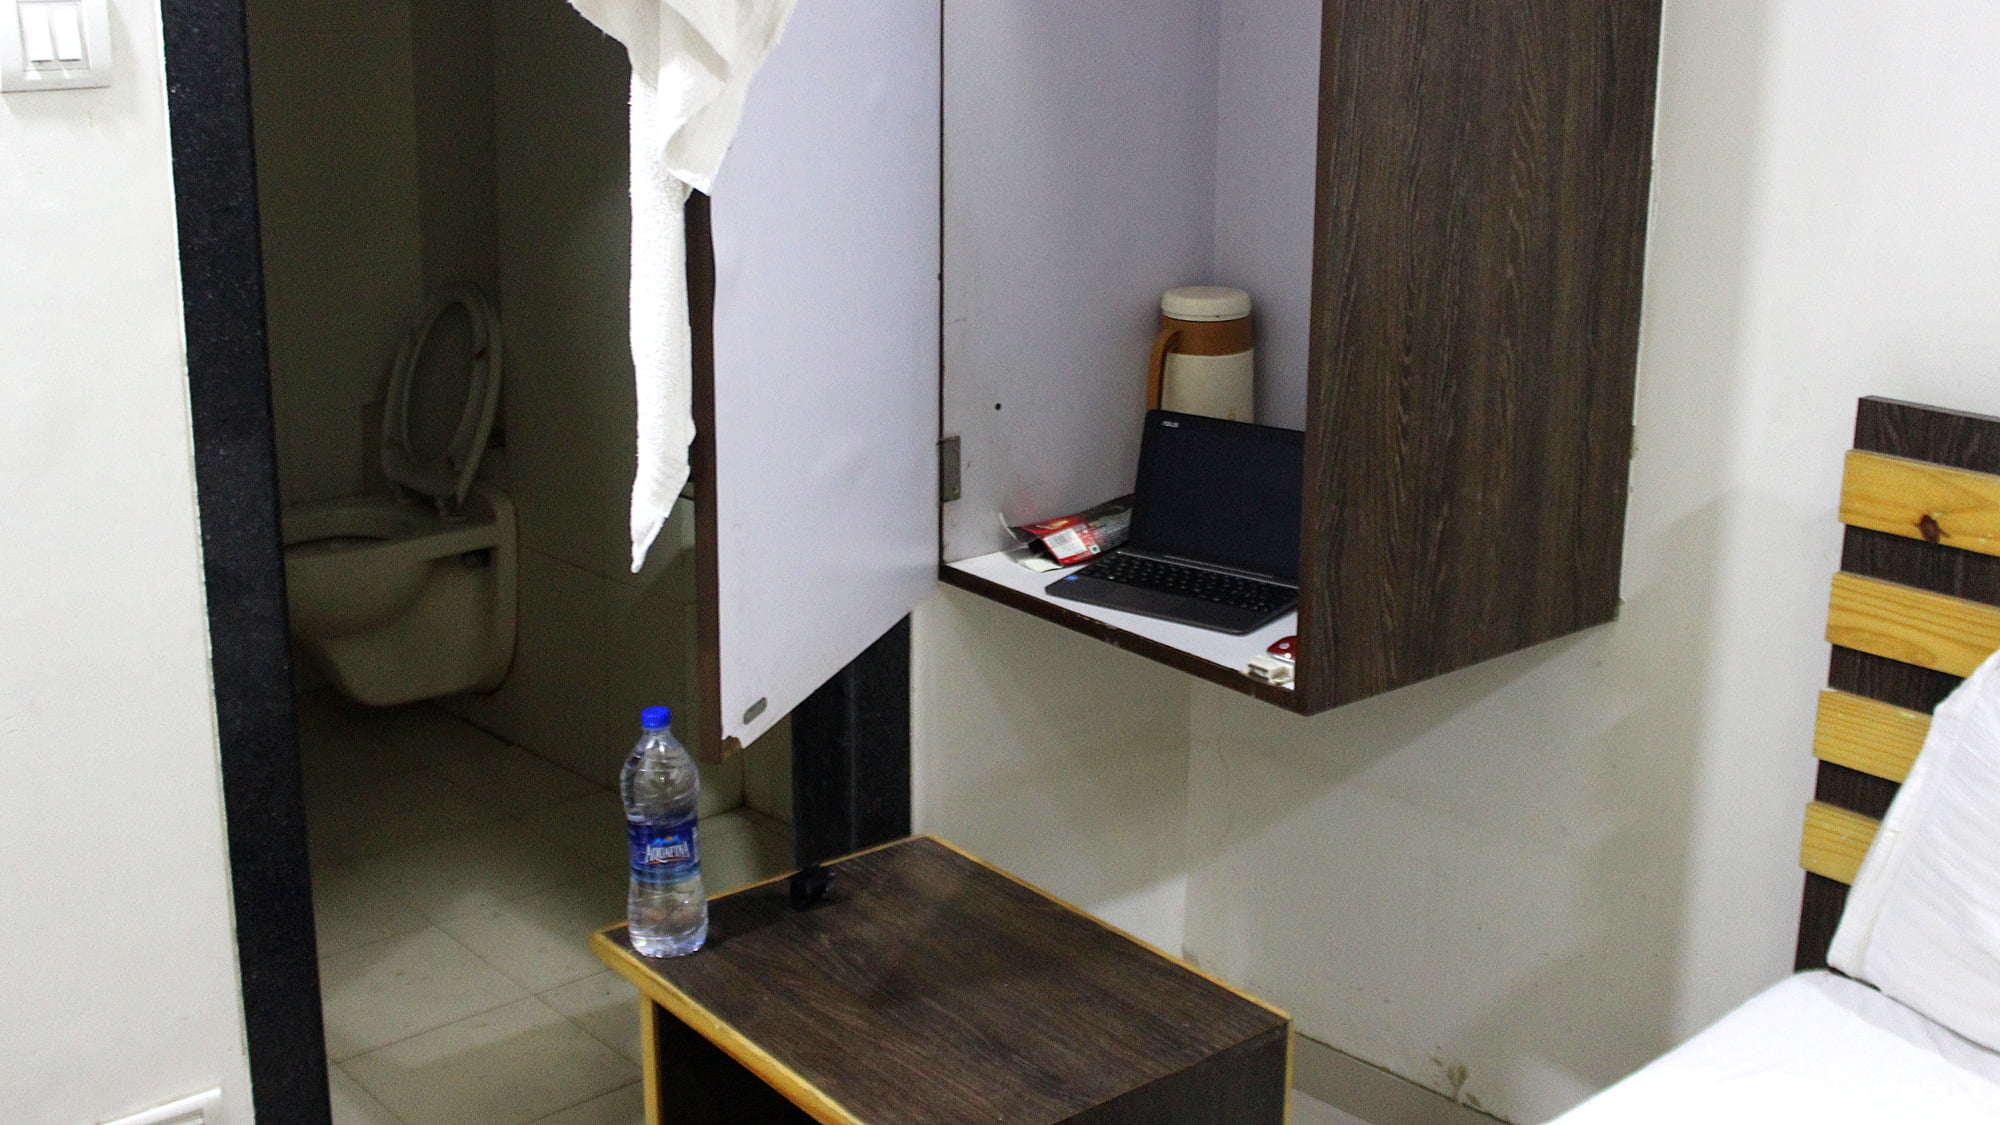 A laptop set on a locker with a nightstand used as a chair in a hotel room in India.